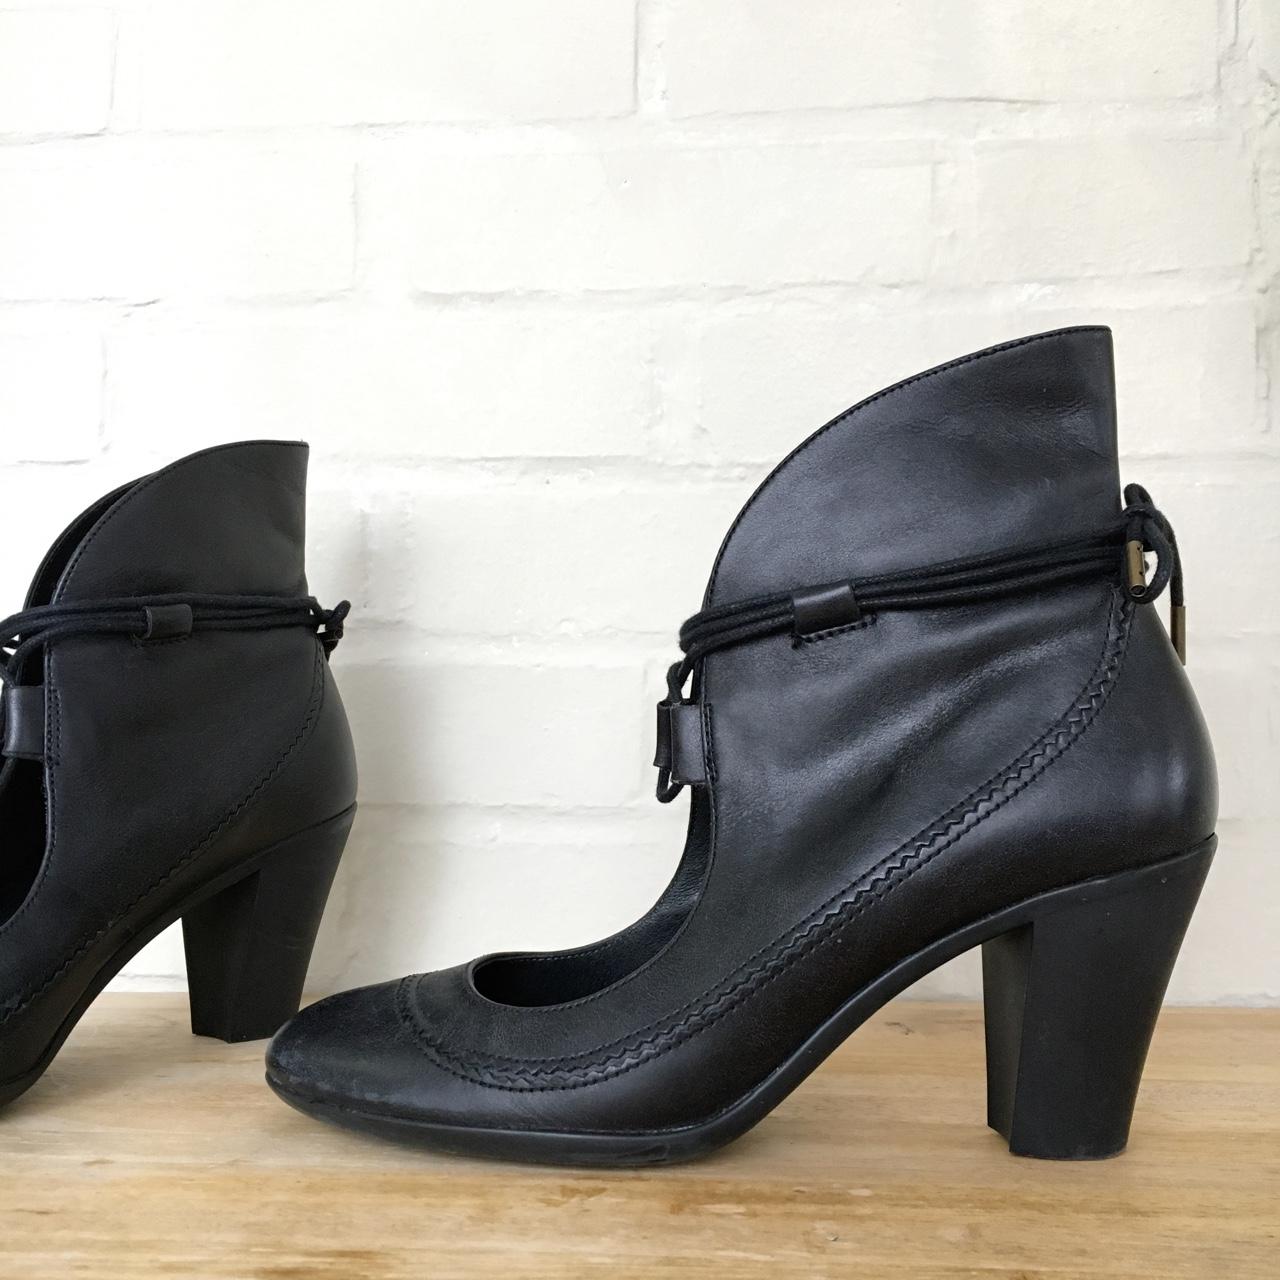 Black leather heeled booties made by Camper, with a... - Depop